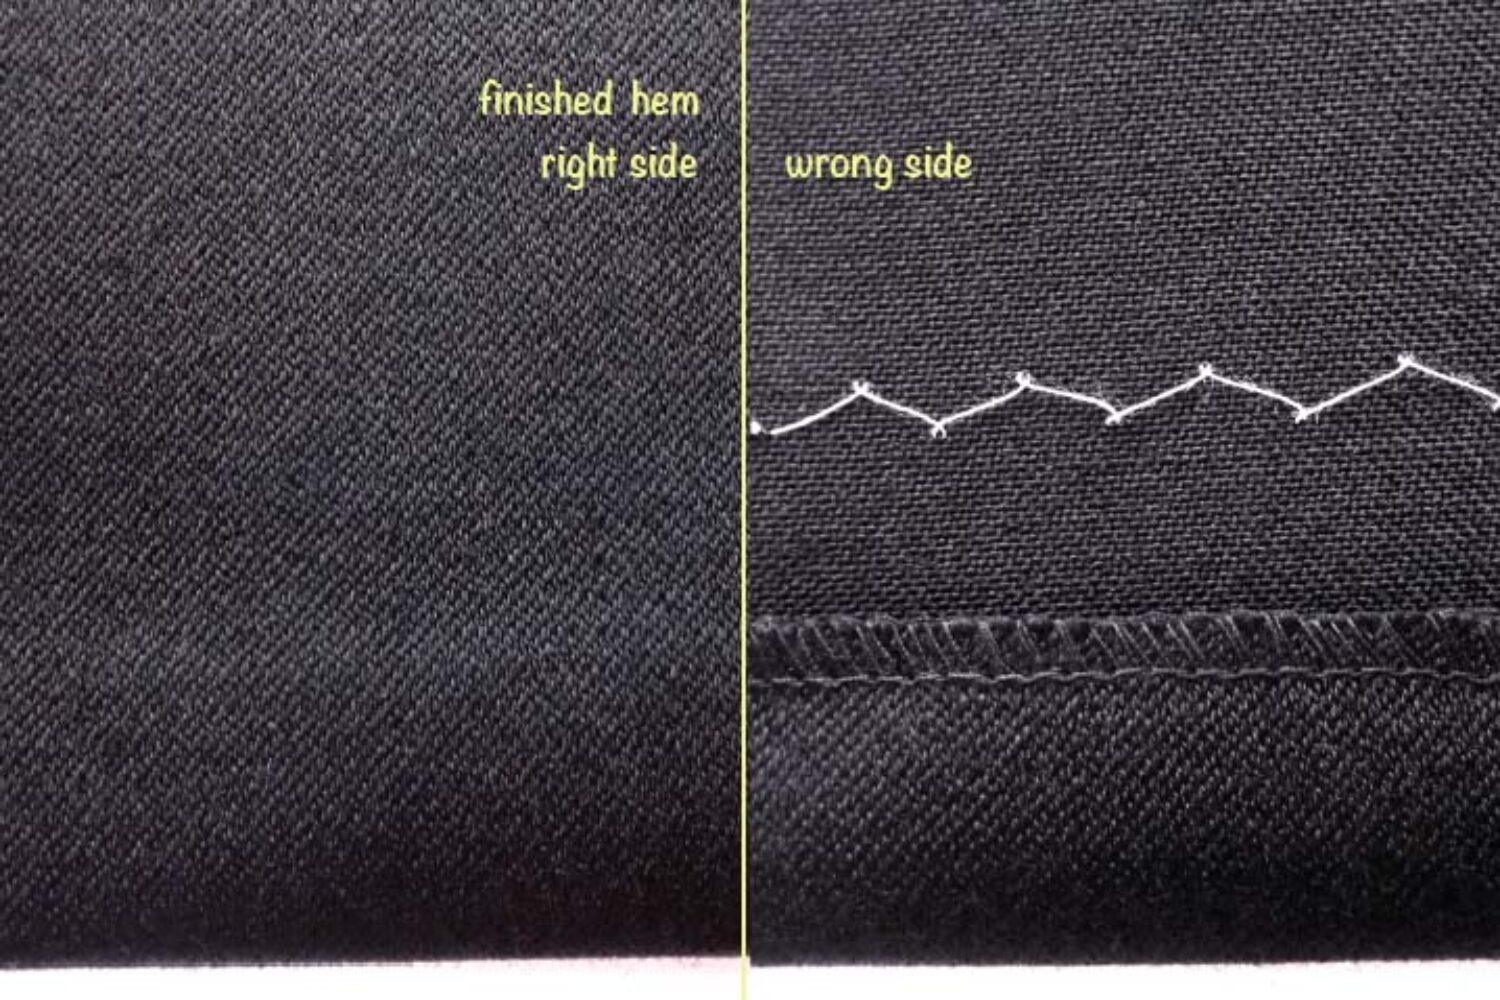 How to hand sew an invisible hem - Inseam Studios